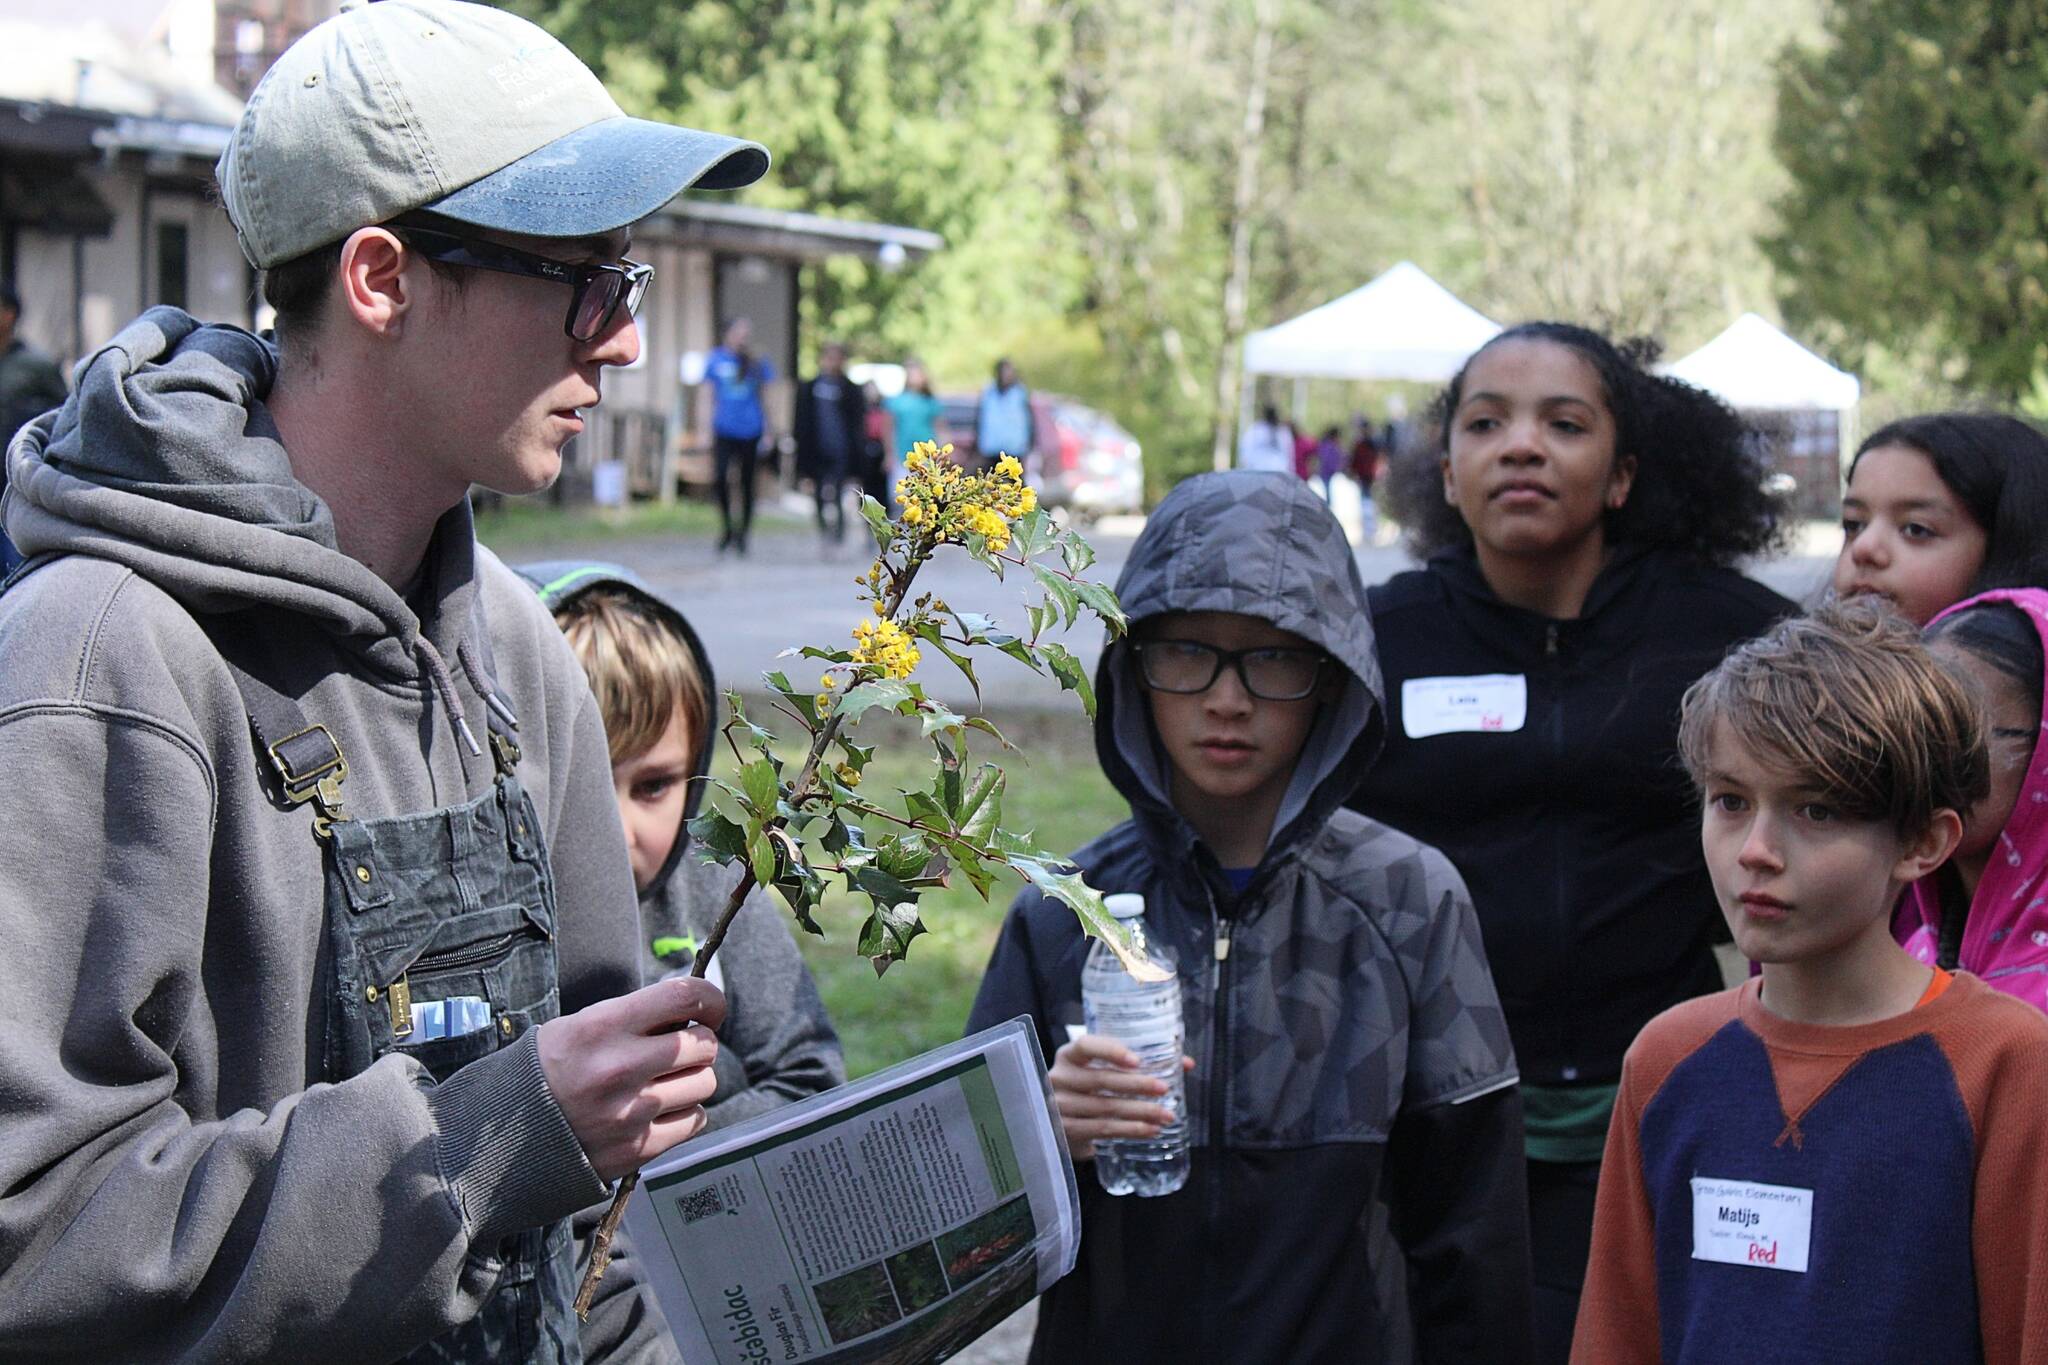 Green Gables elementary school kids learn about a species of flower during their trip to the the West Hylebos Wetlands during an April 27 field trip. Alex Bruell / The Mirror